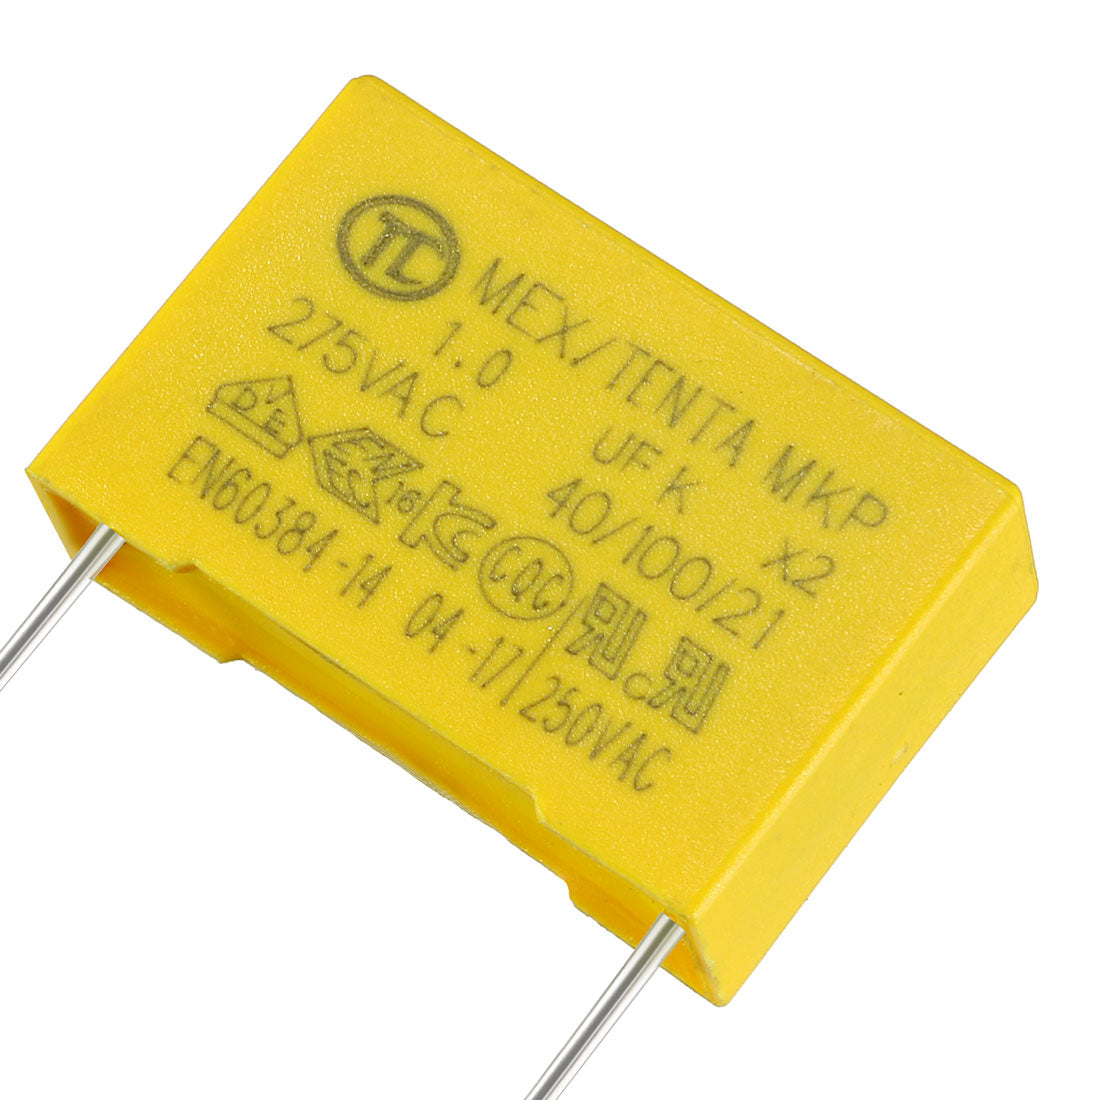 uxcell Uxcell Polypropylene Film Safety Capacitors 1uF 275VAC X2 MKP 10 Pcs